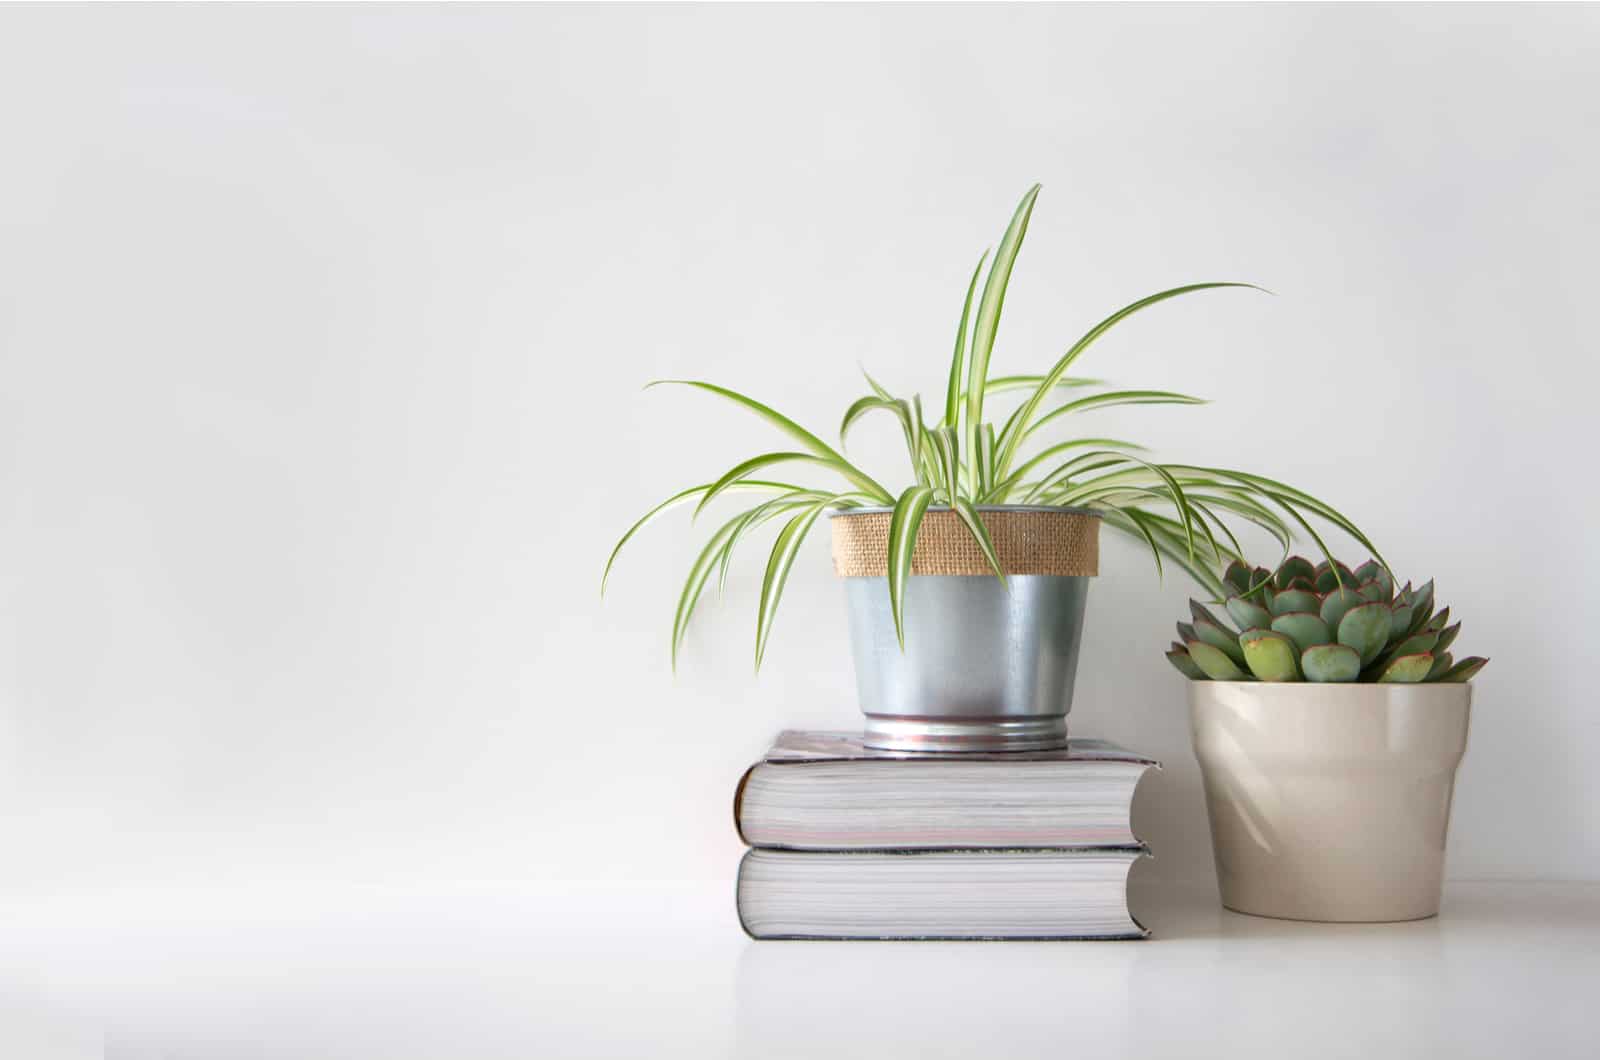 Succulent plant and a spider plant in different pots on top of books against white wall